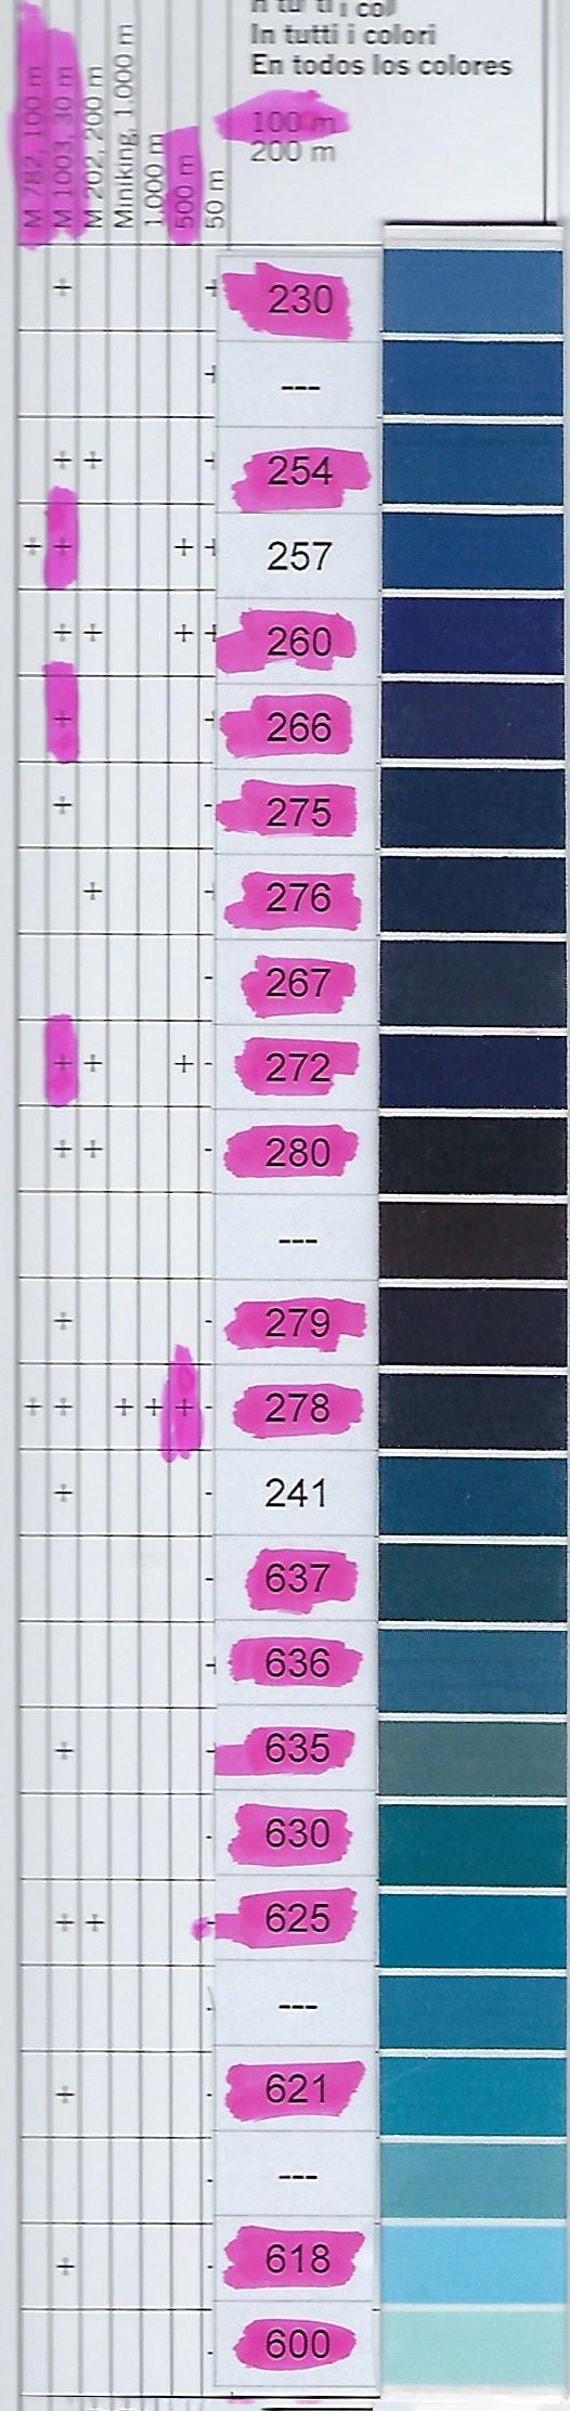 Gutermann Polyester Thread. Sew All, Polyester Thread. This is the Small  Size 109 Yards. 3 Colors Are Number 520 Thru 655. 